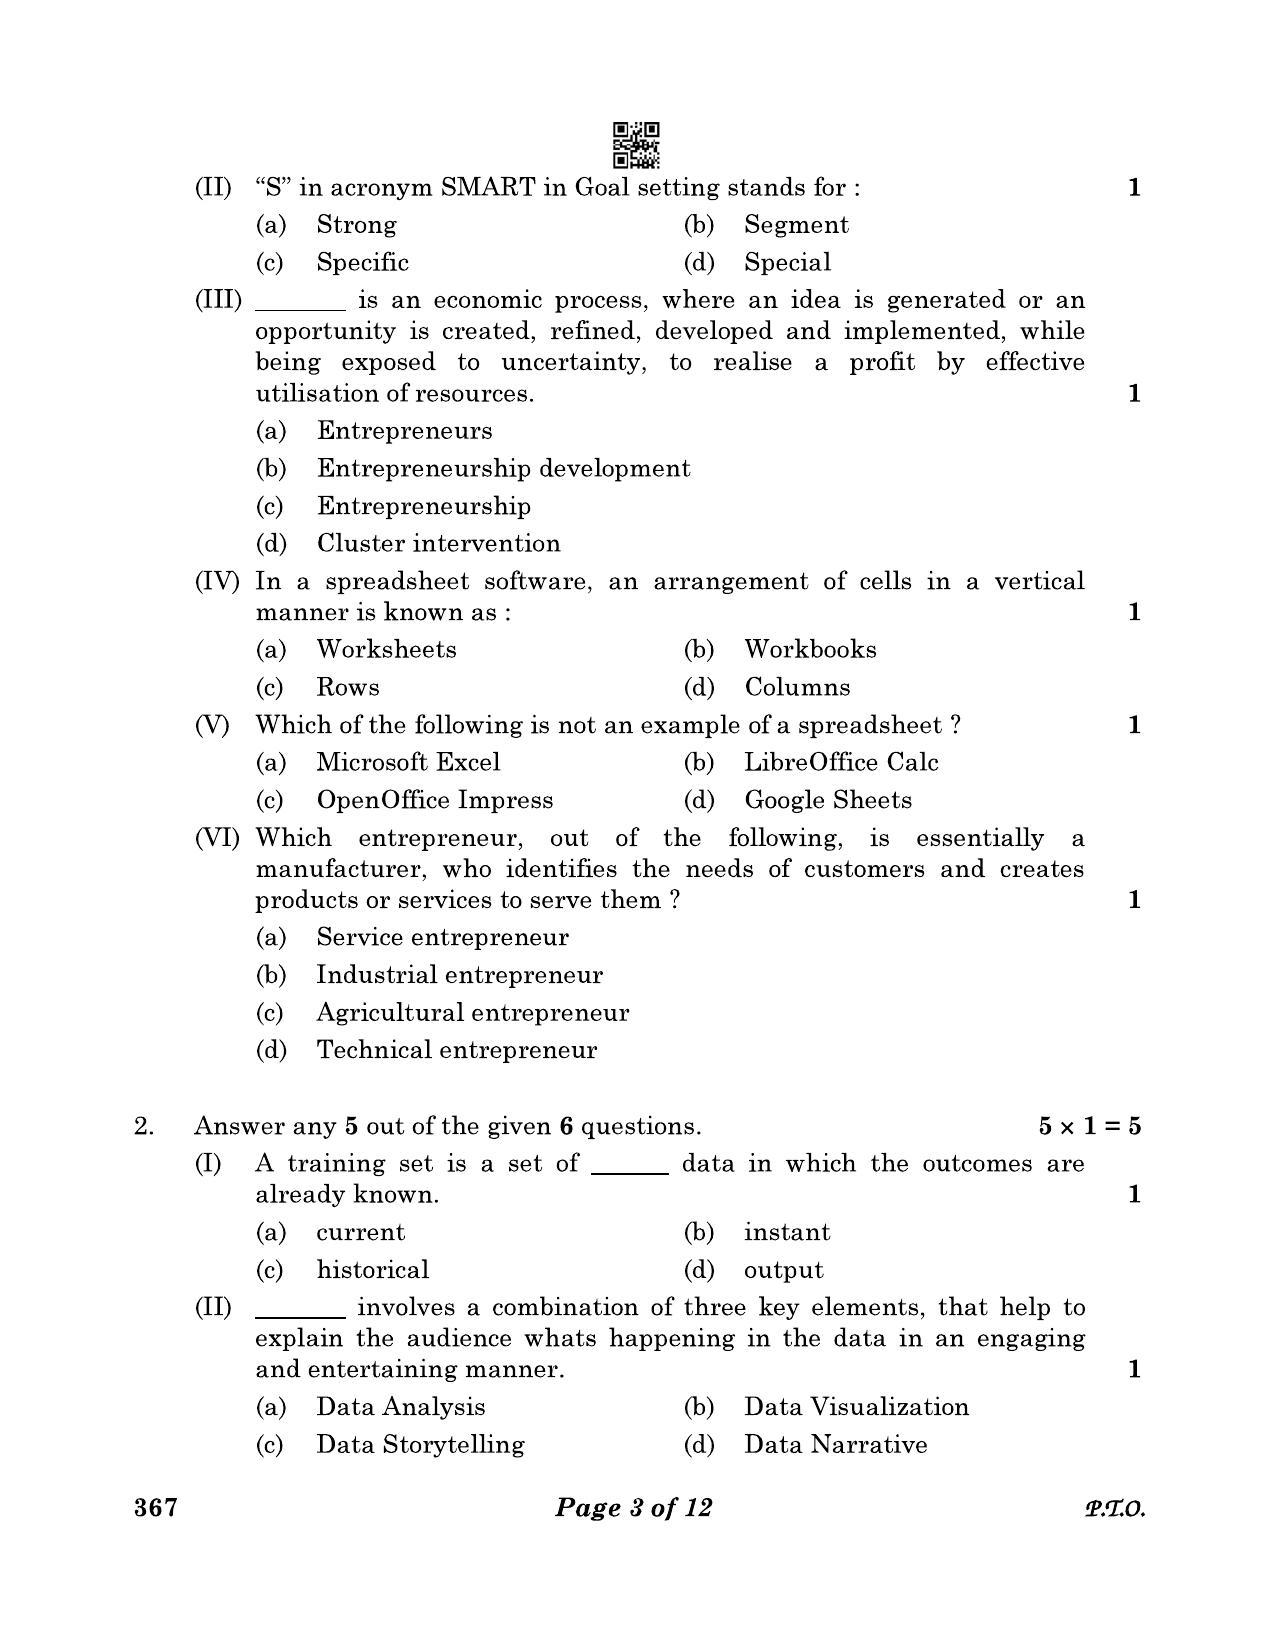 CBSE Class 12 367_Artificial Intelligence 2023 Question Paper - Page 3